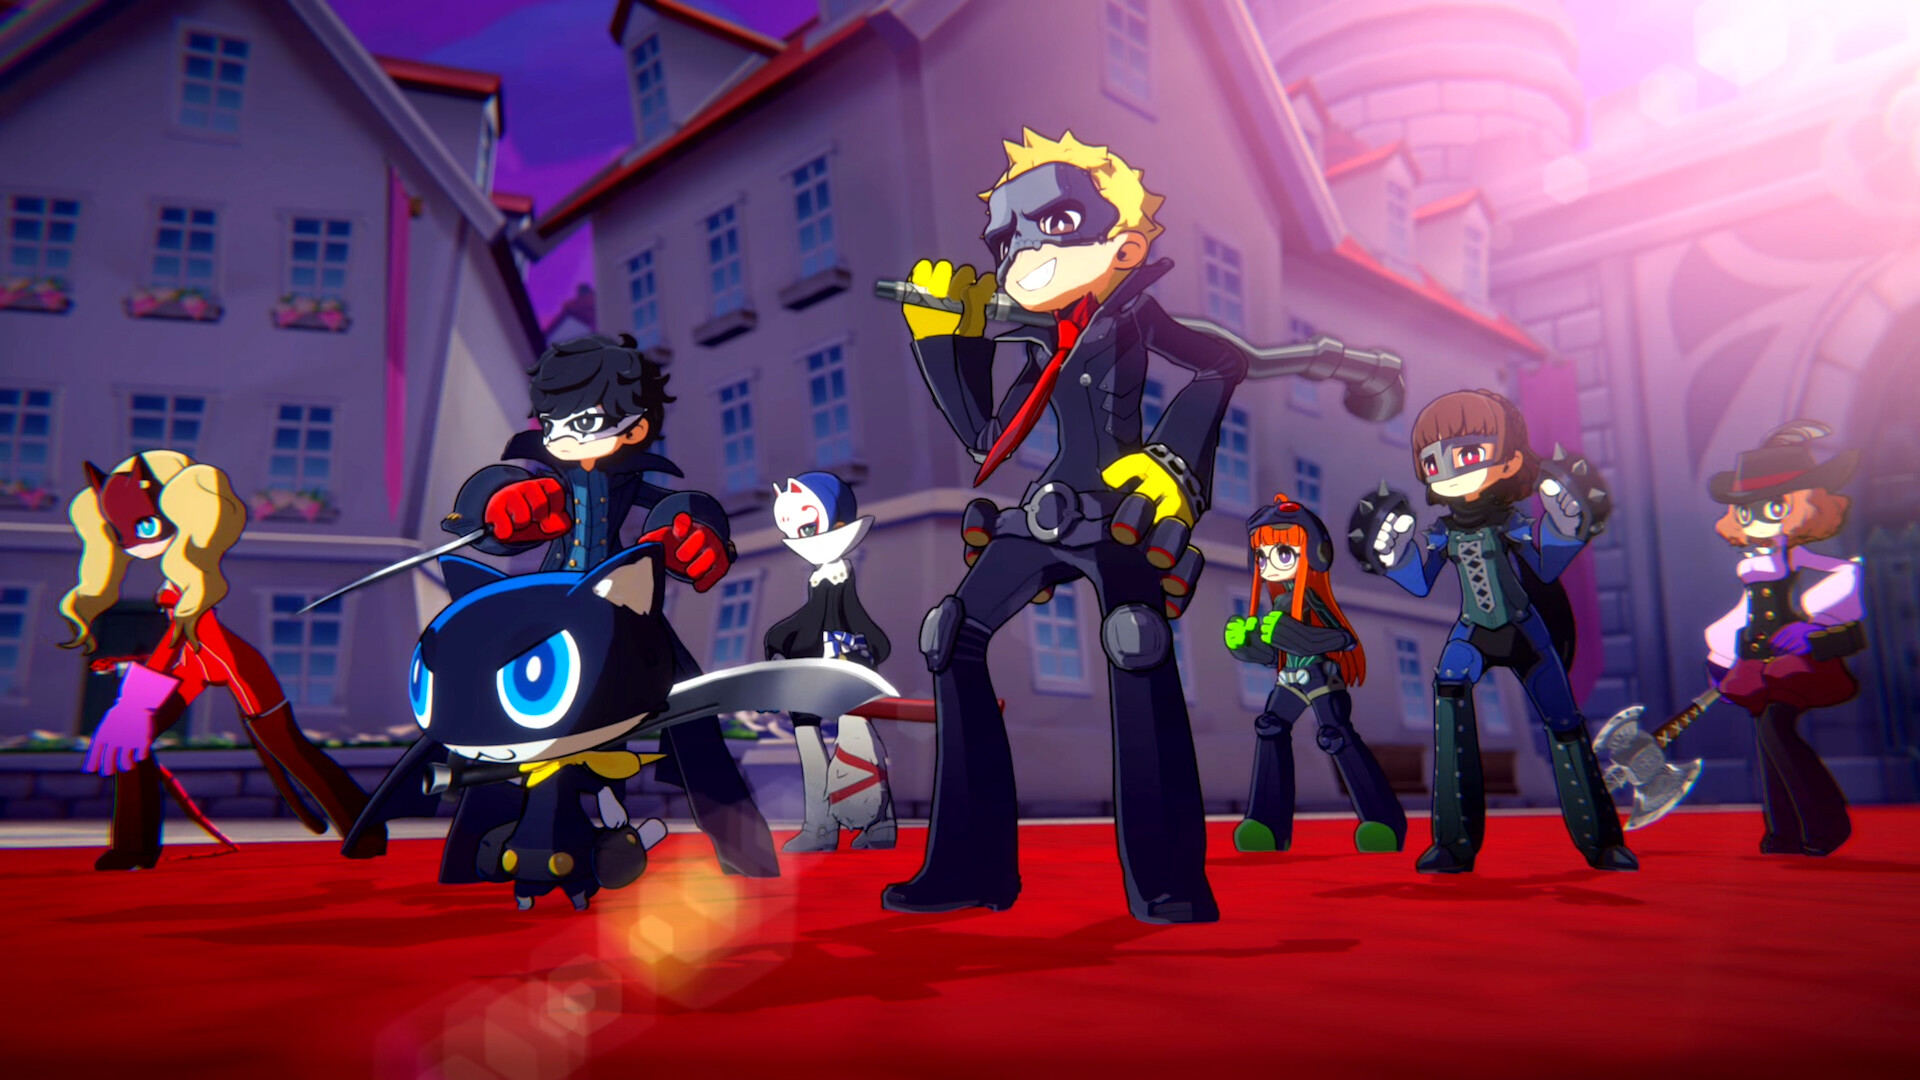 Persona 5 review: One of the best JRPGs out there